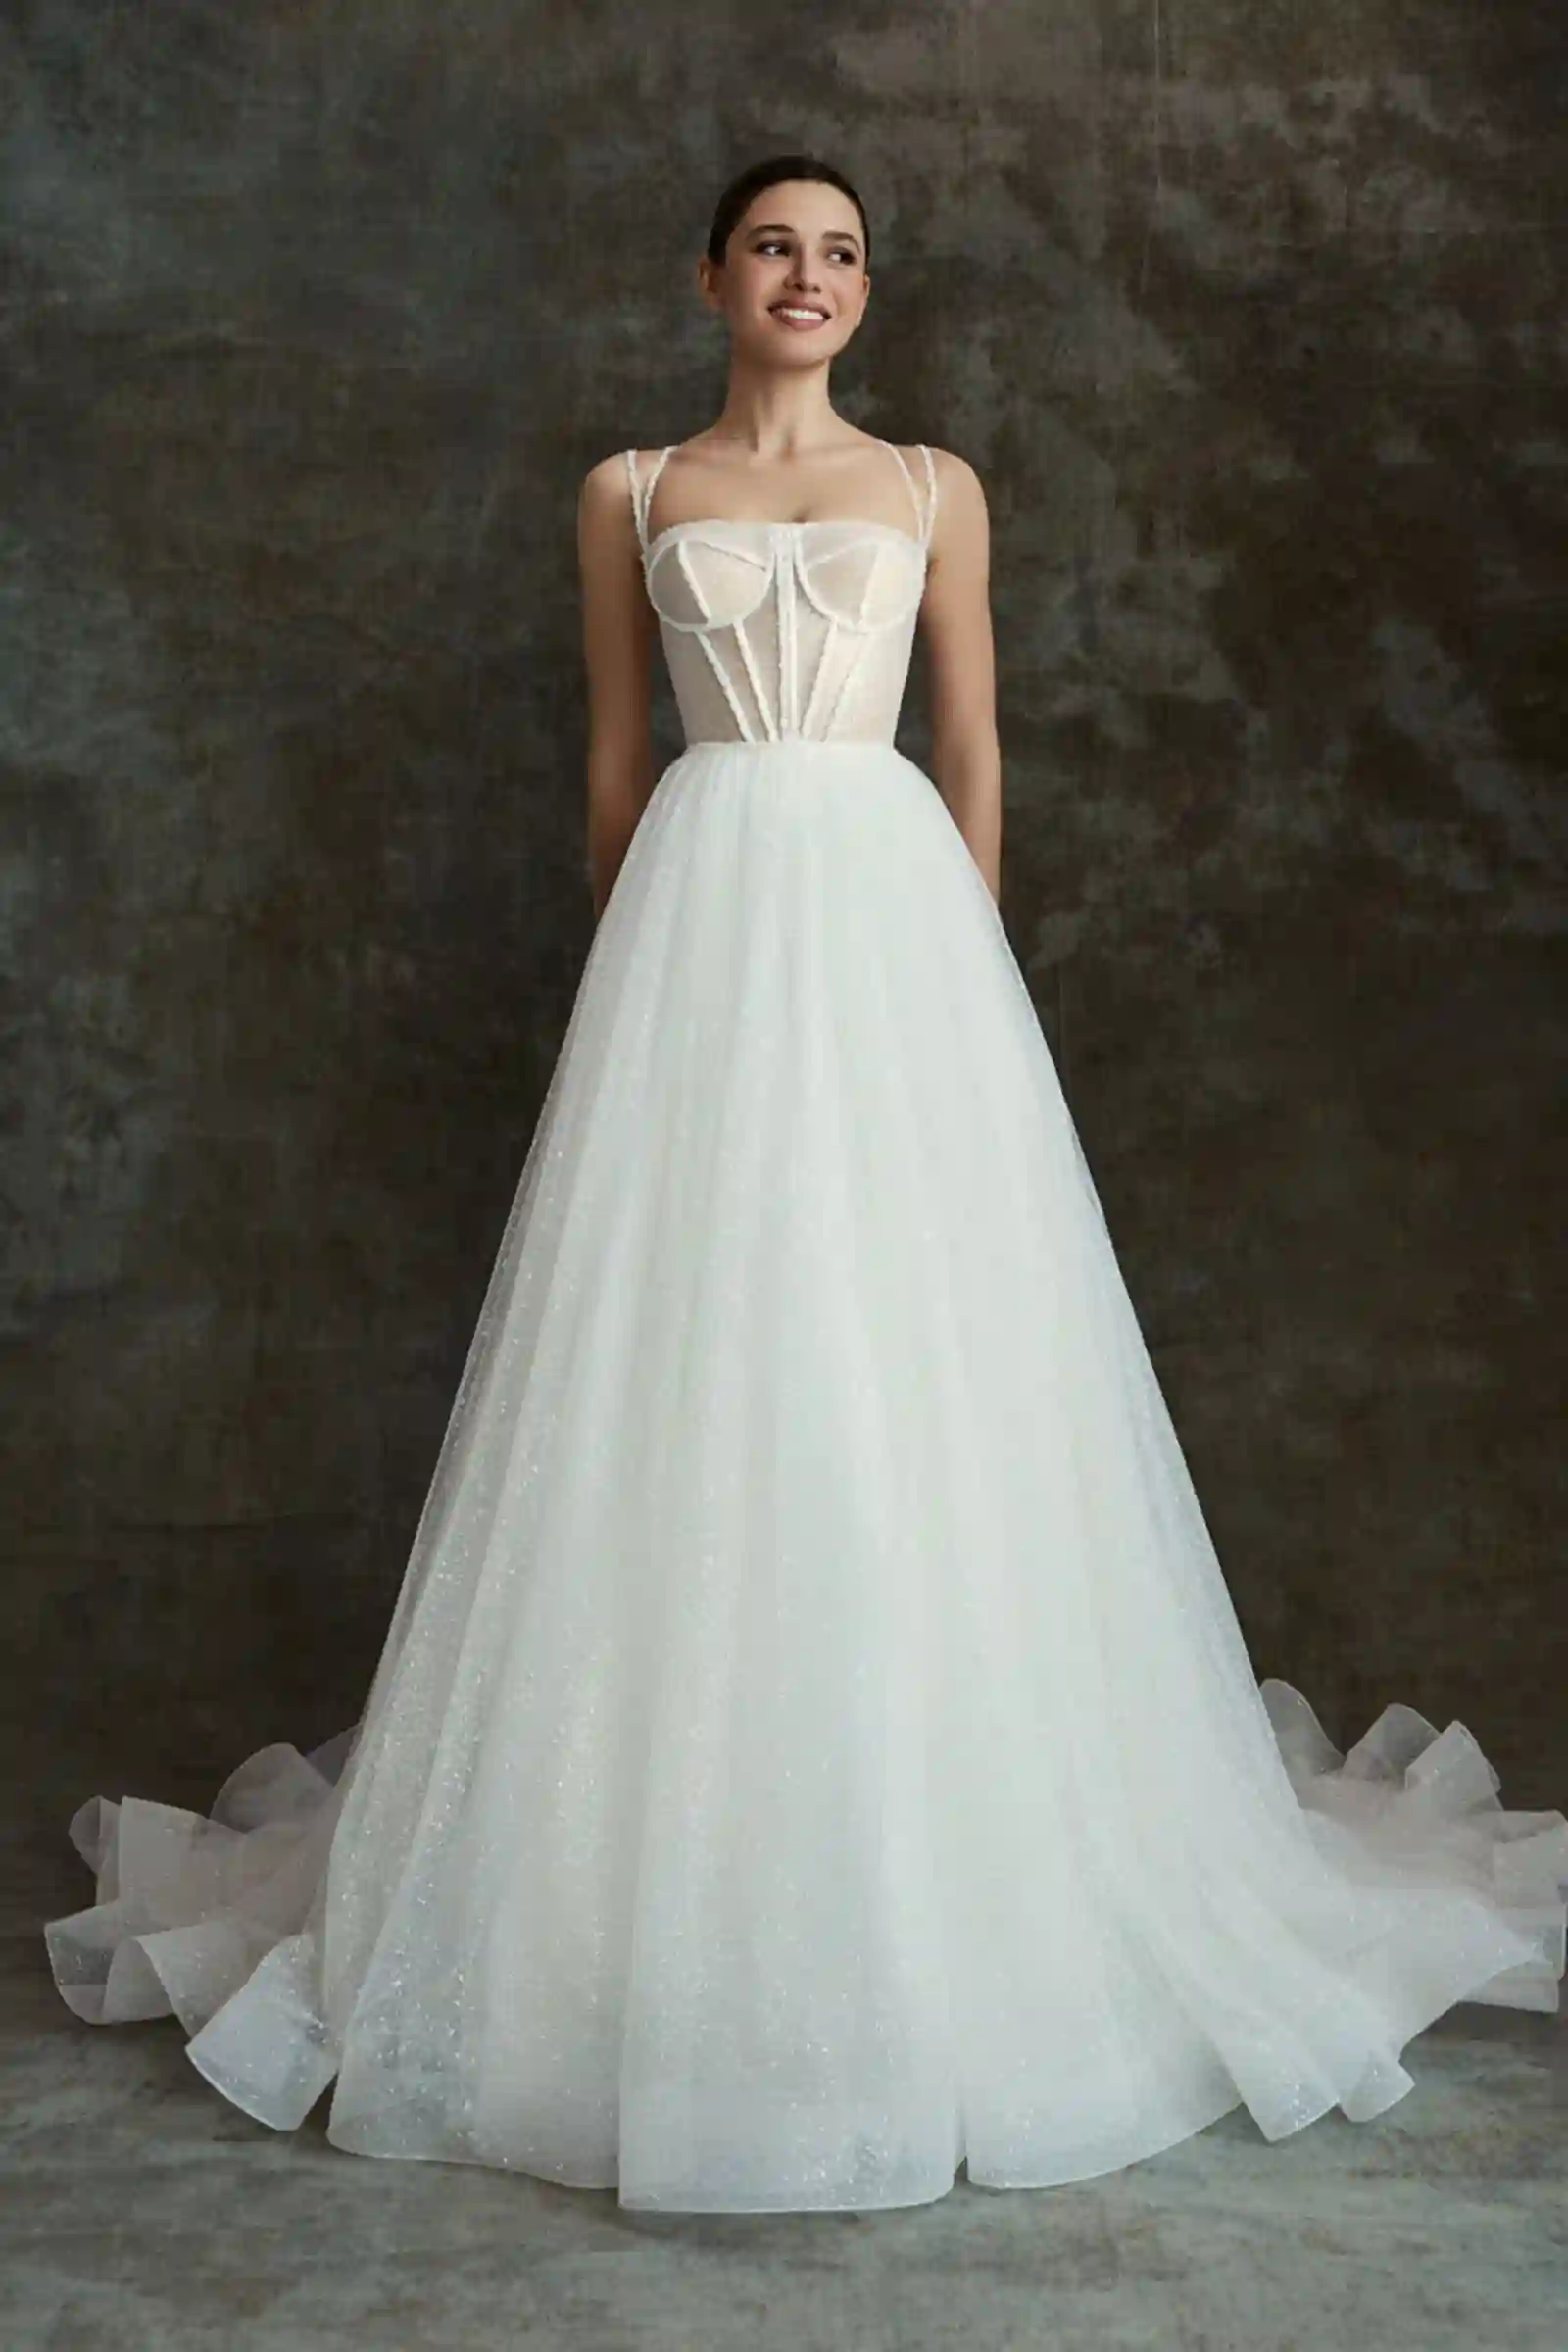 Featured image for “Brautkleid Cathy”